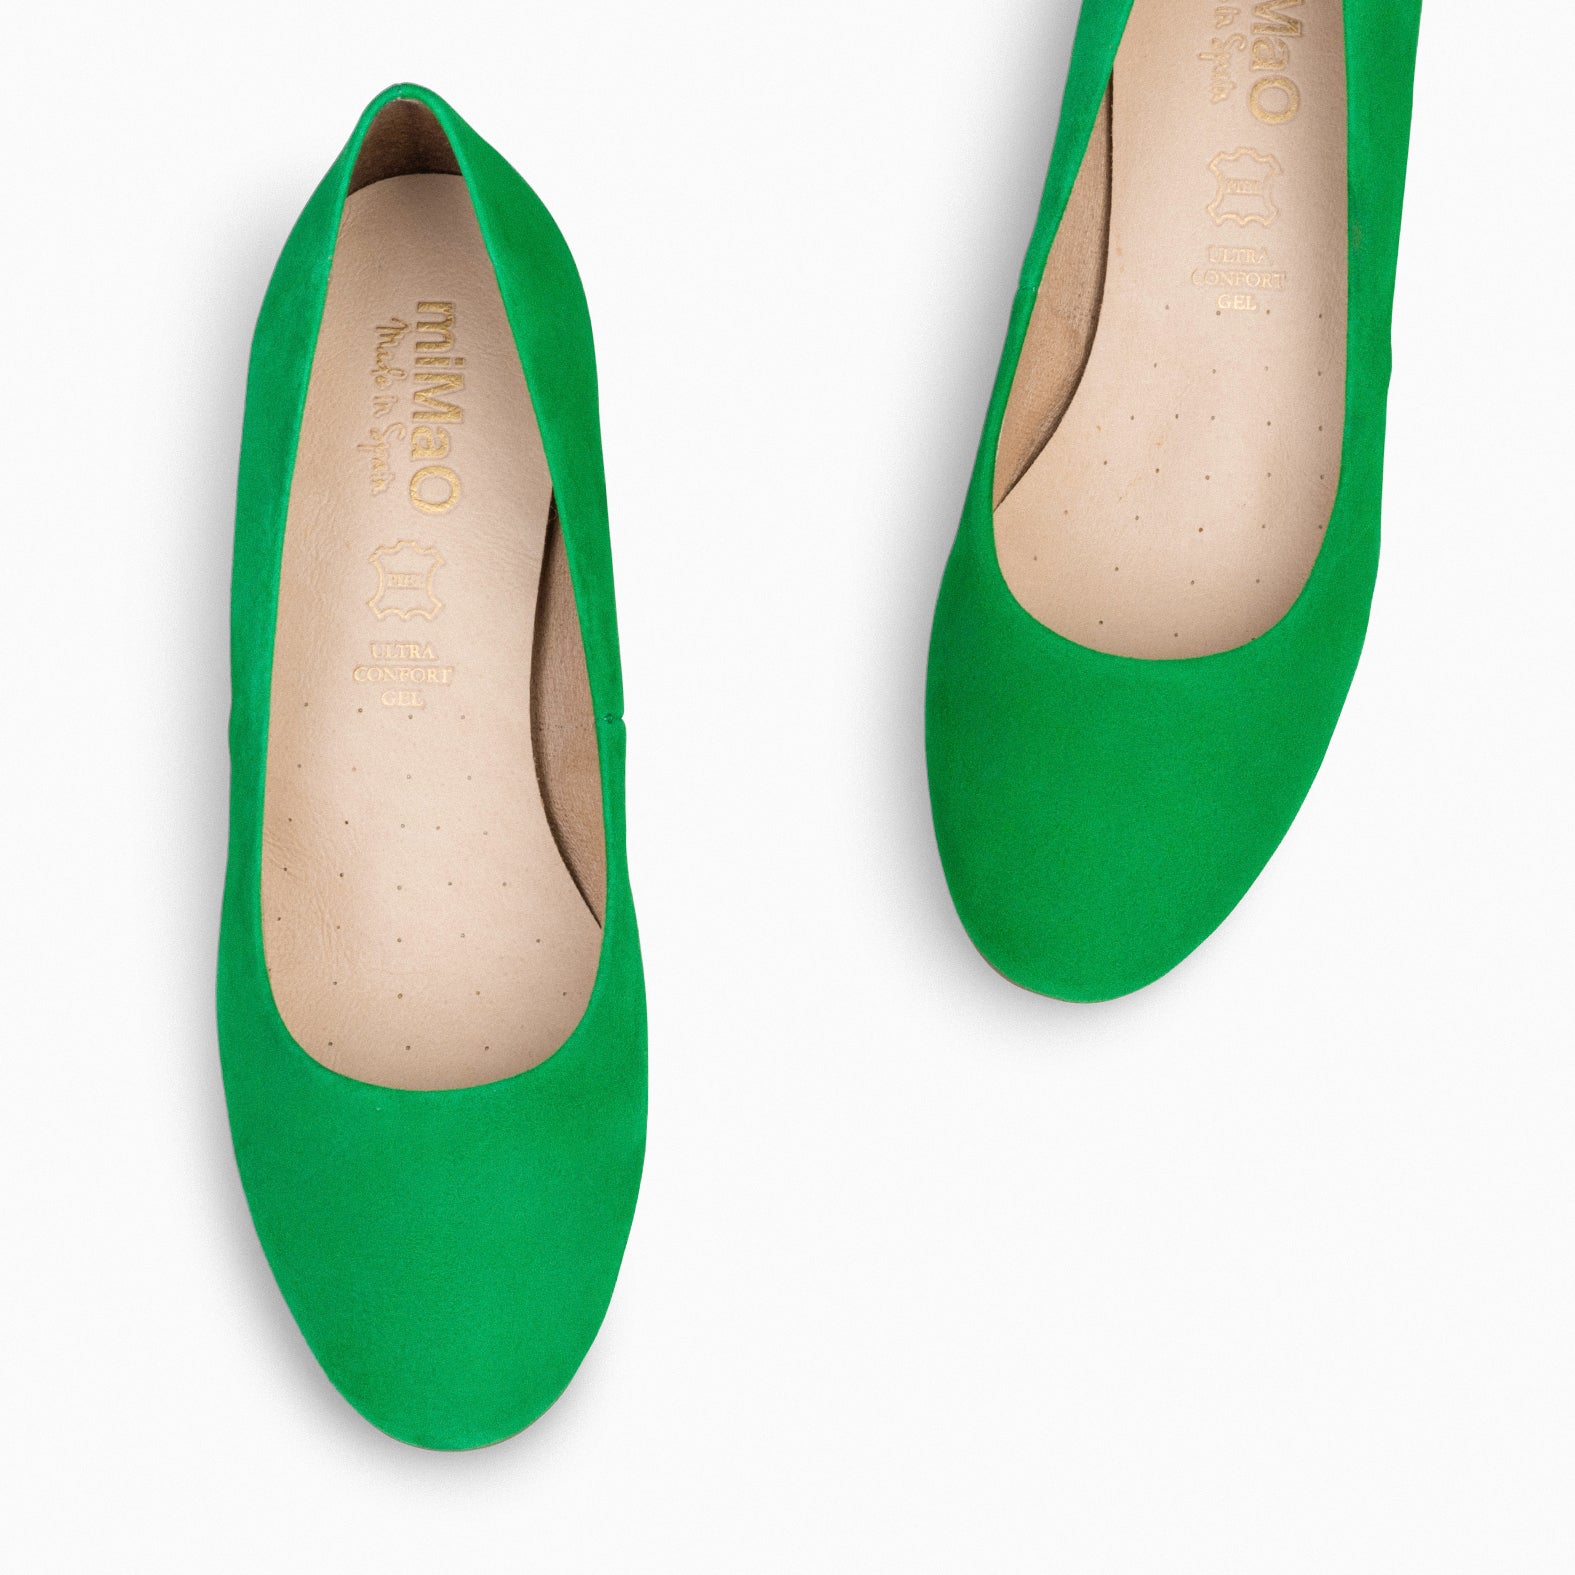 URBAN ROUND – GREEN suede leather low heels